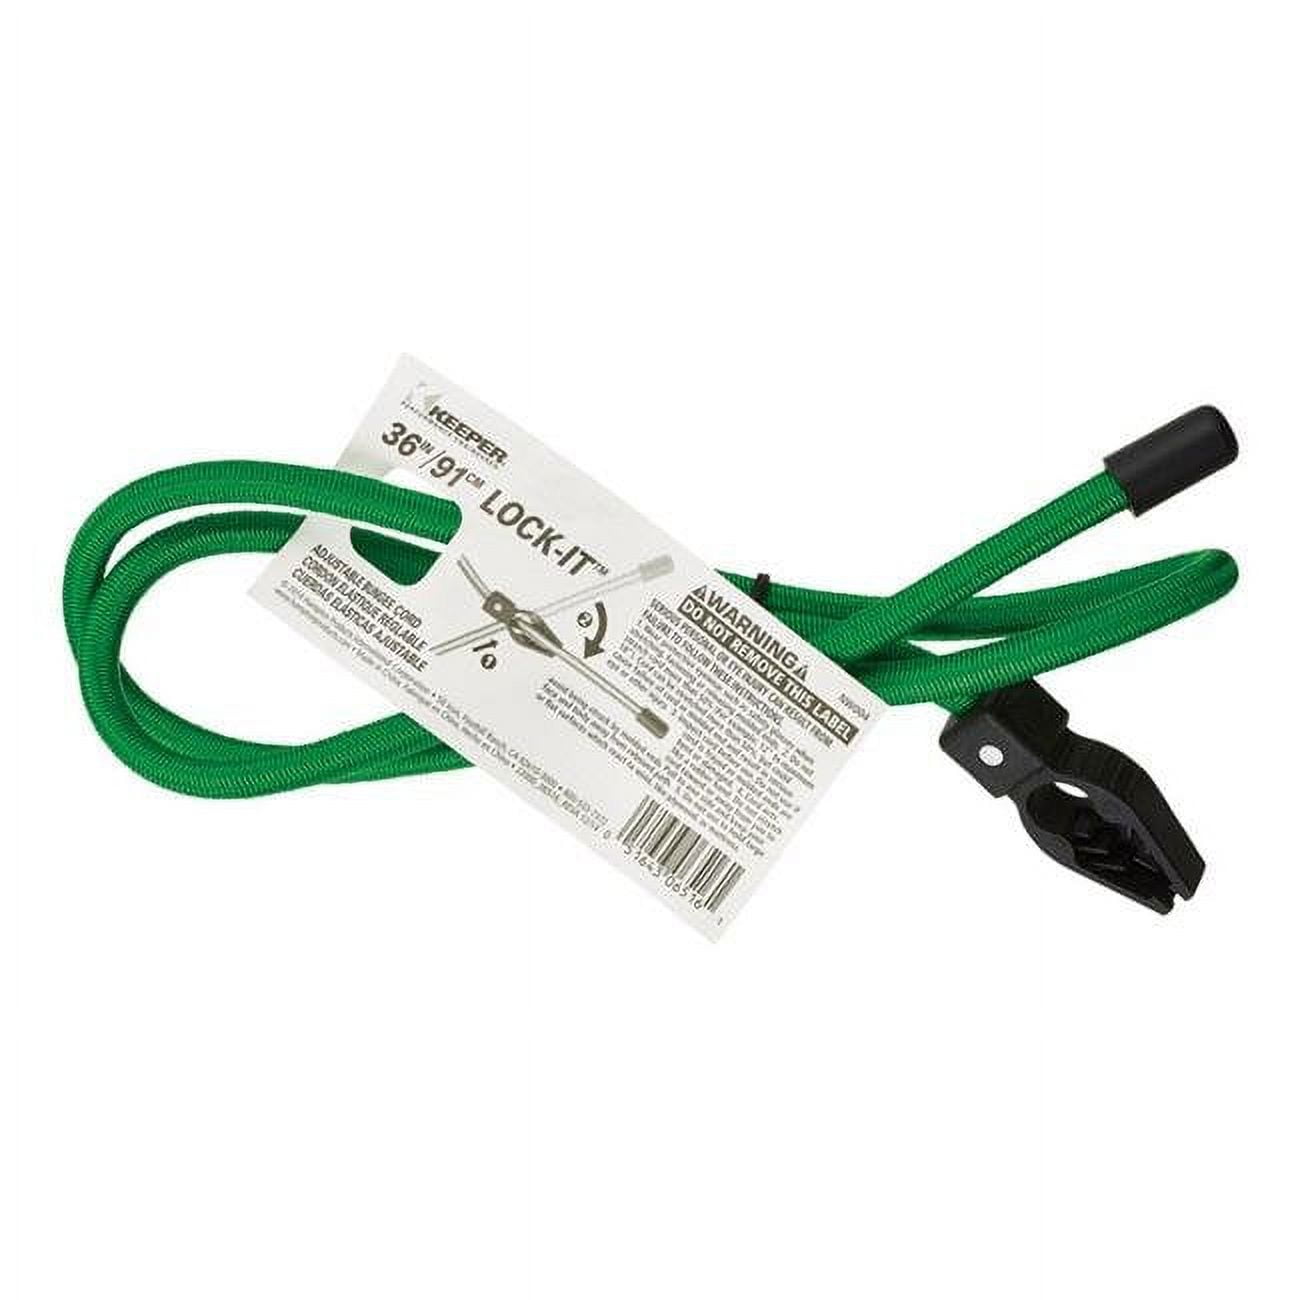 8865628 36 In. Lock It Adjustable Bungee Cord, Green - Pack Of 24